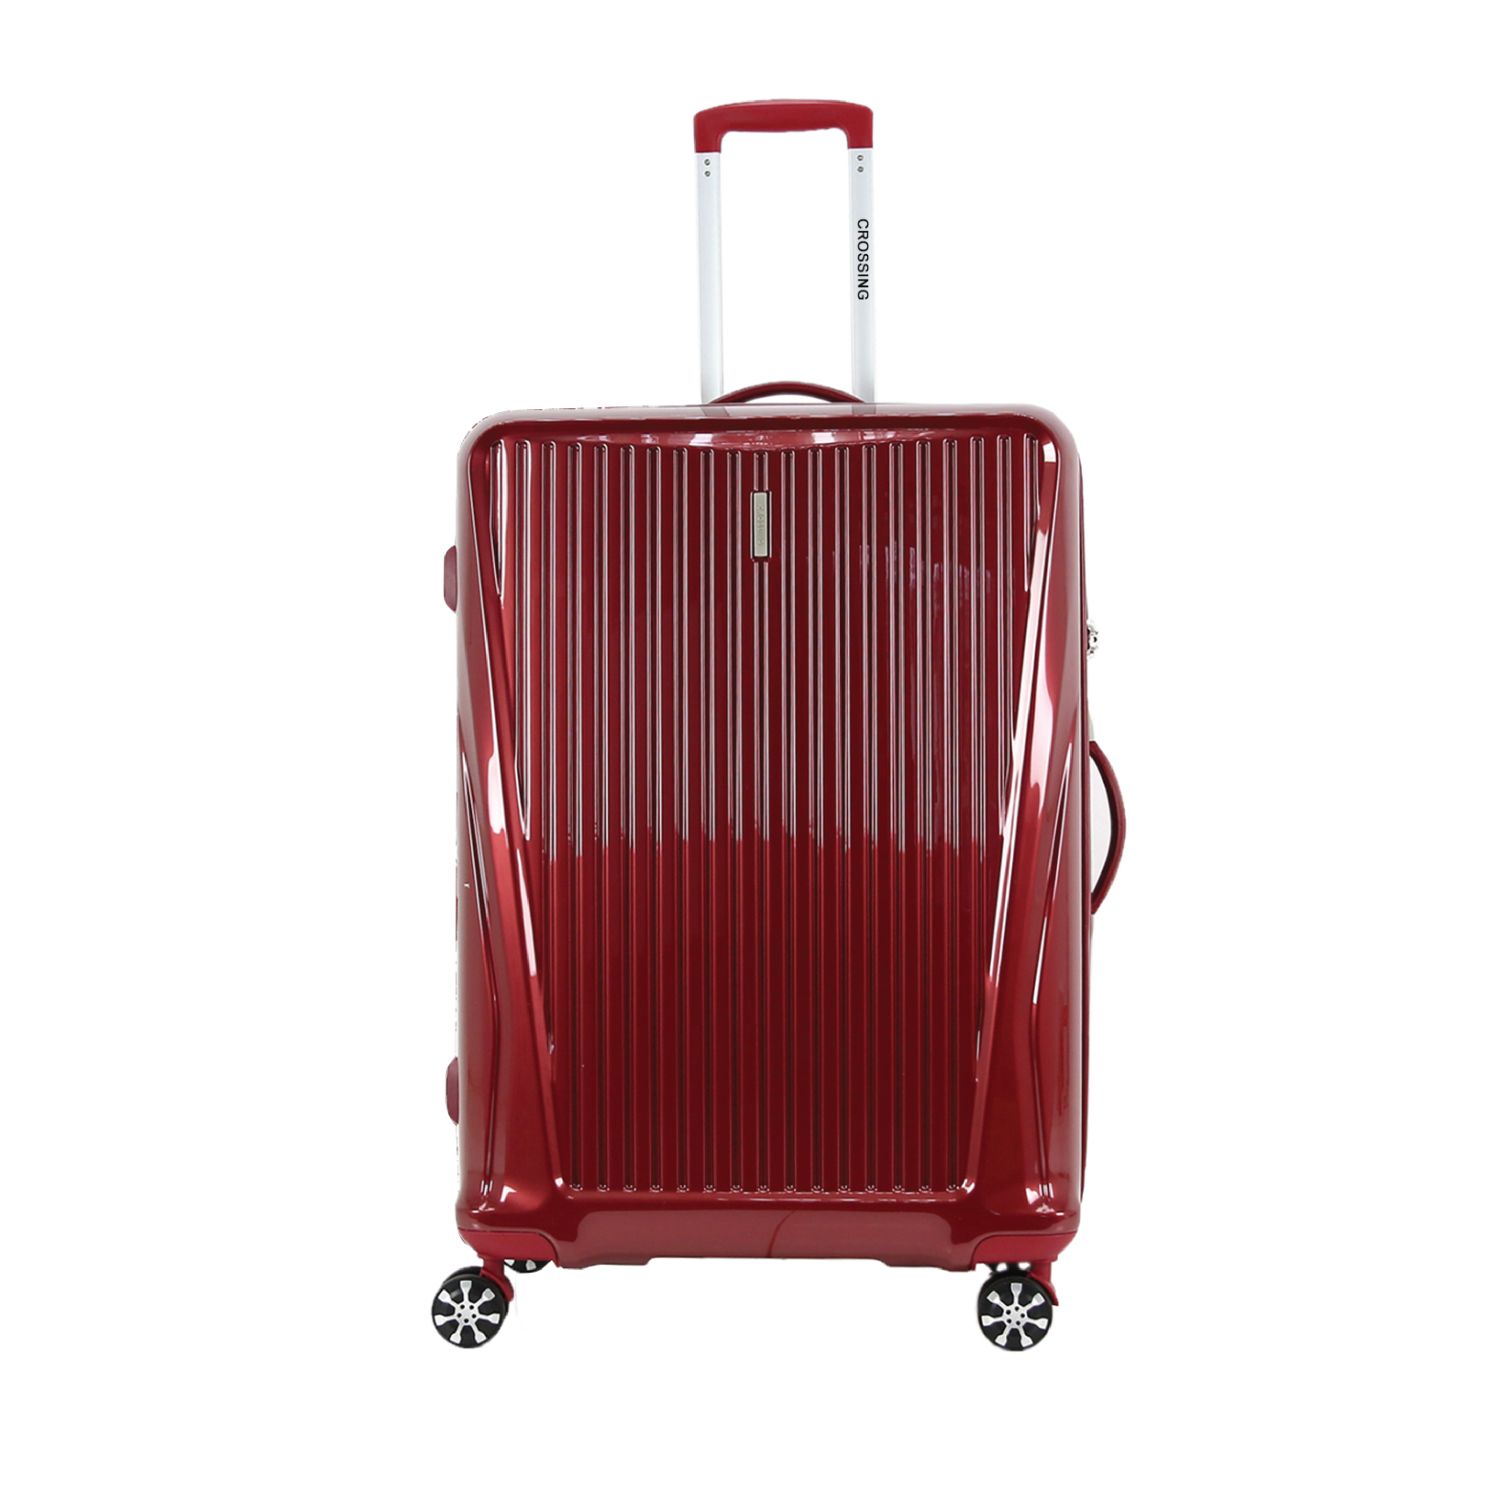 Crossing Double Zipper Upright Large Luggage 28 (Red) - Seager Inc